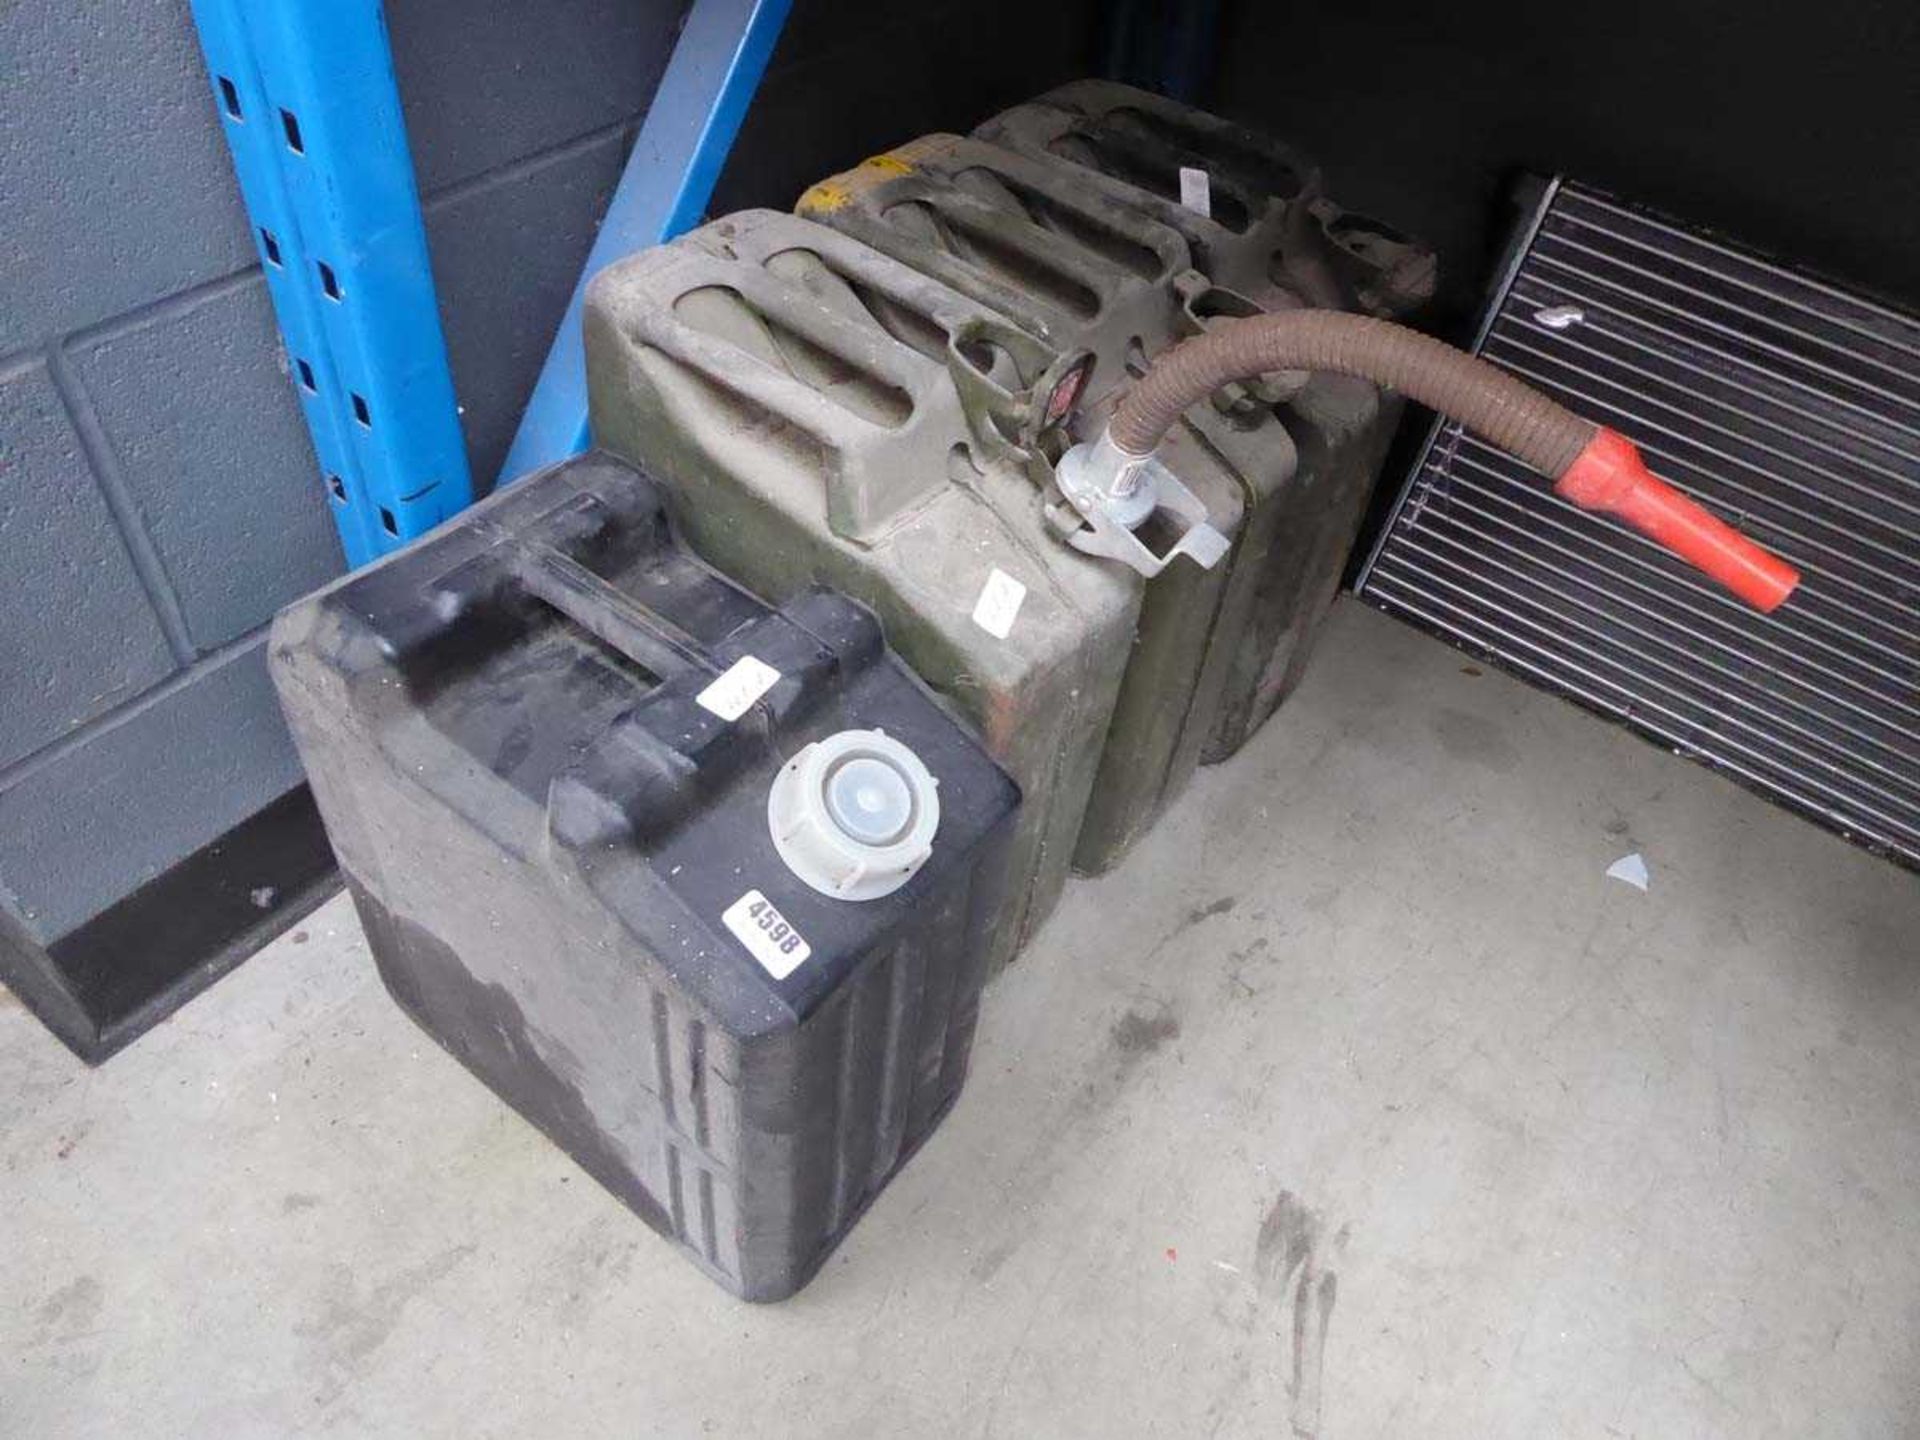 3 x metal jerry cans and a metal jerry can